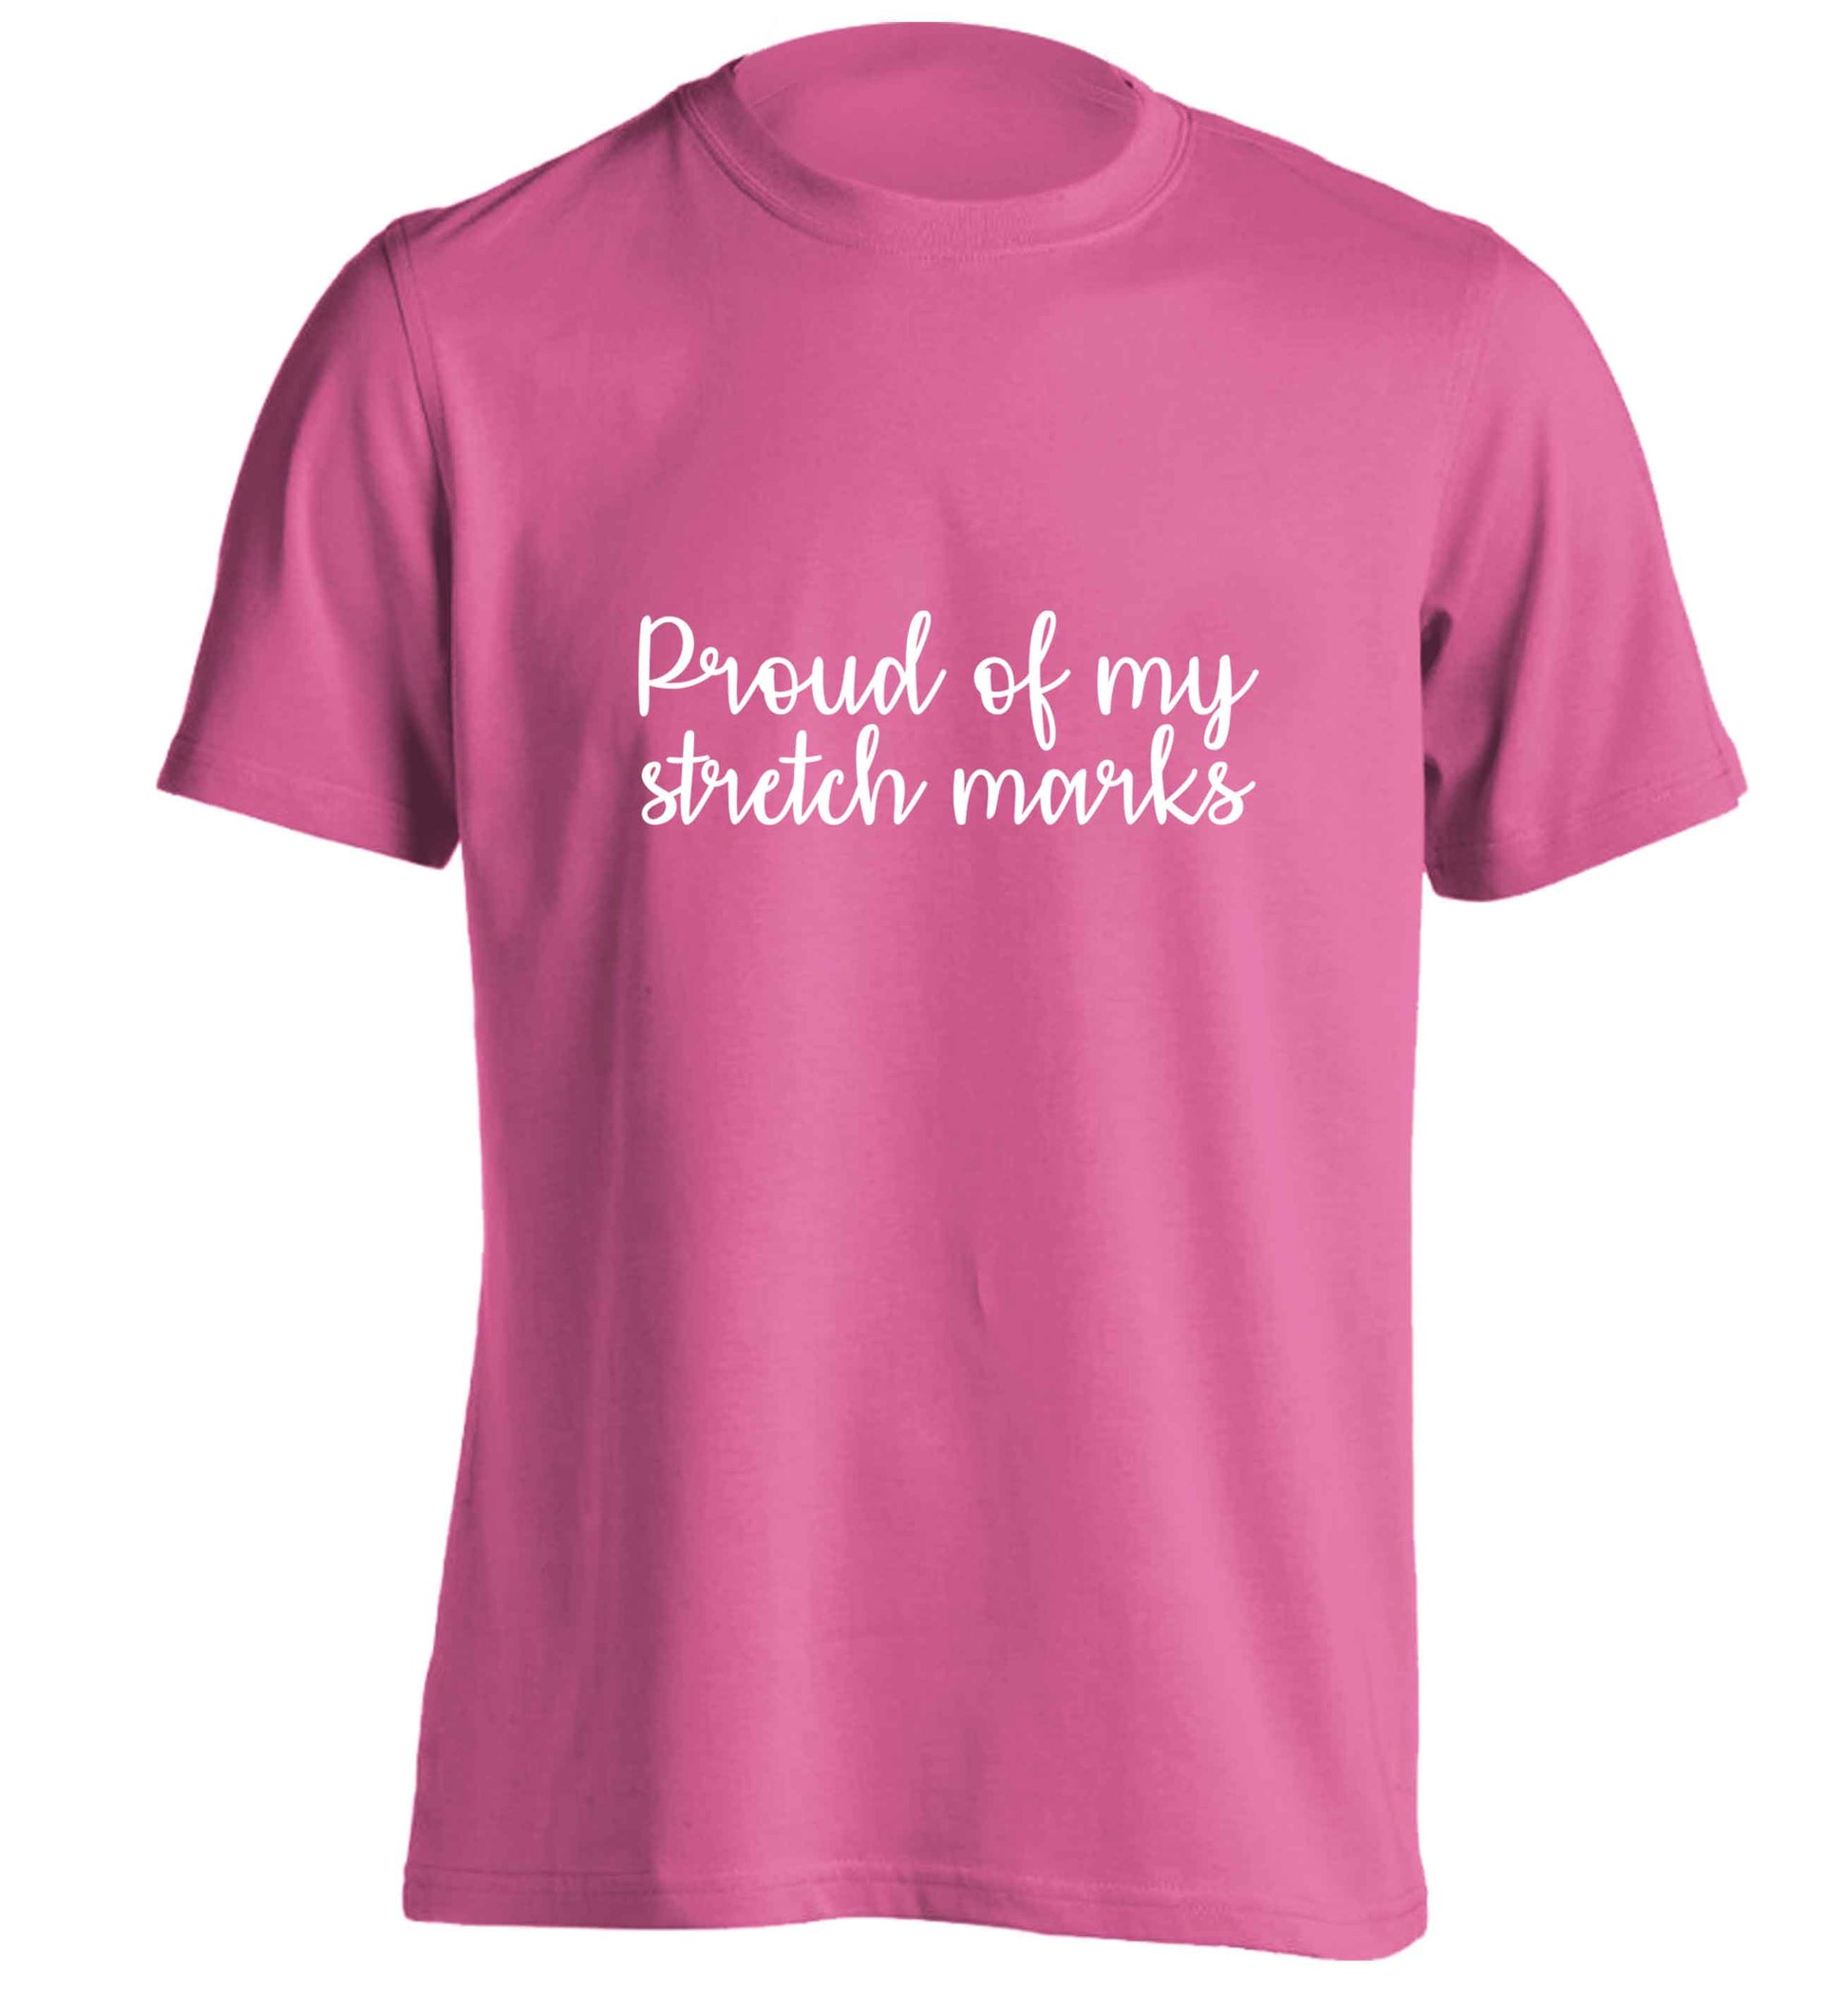 Proud of my stretch marks adults unisex pink Tshirt 2XL